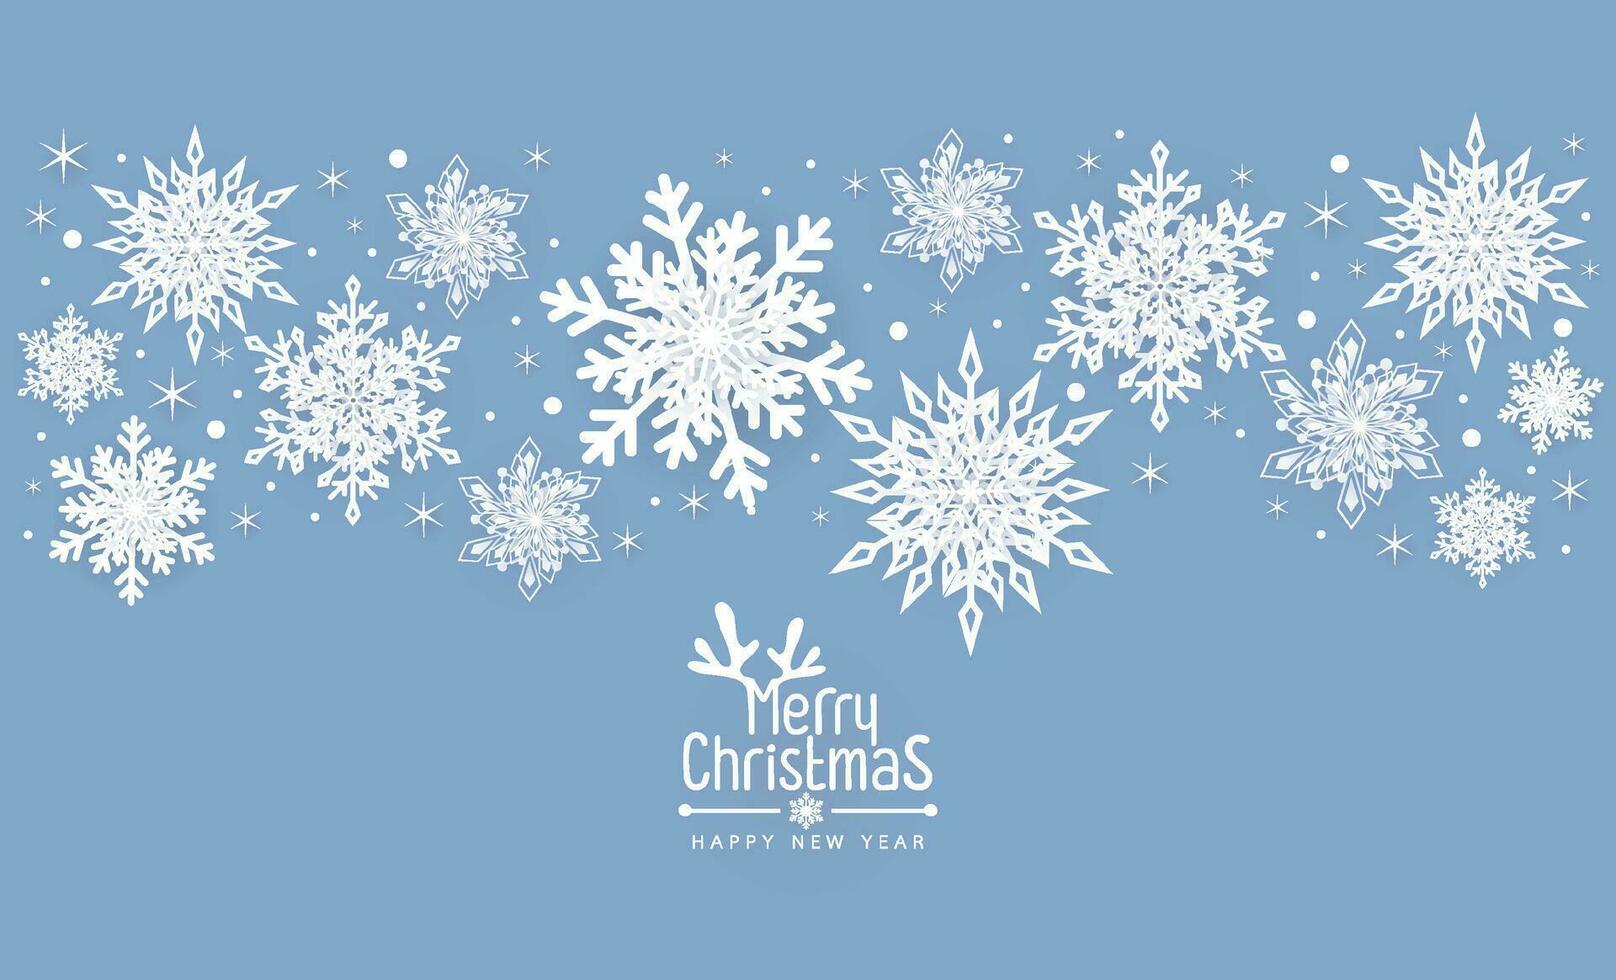 Merry Christmas background with snowflakes, banner, card. Vector illustration